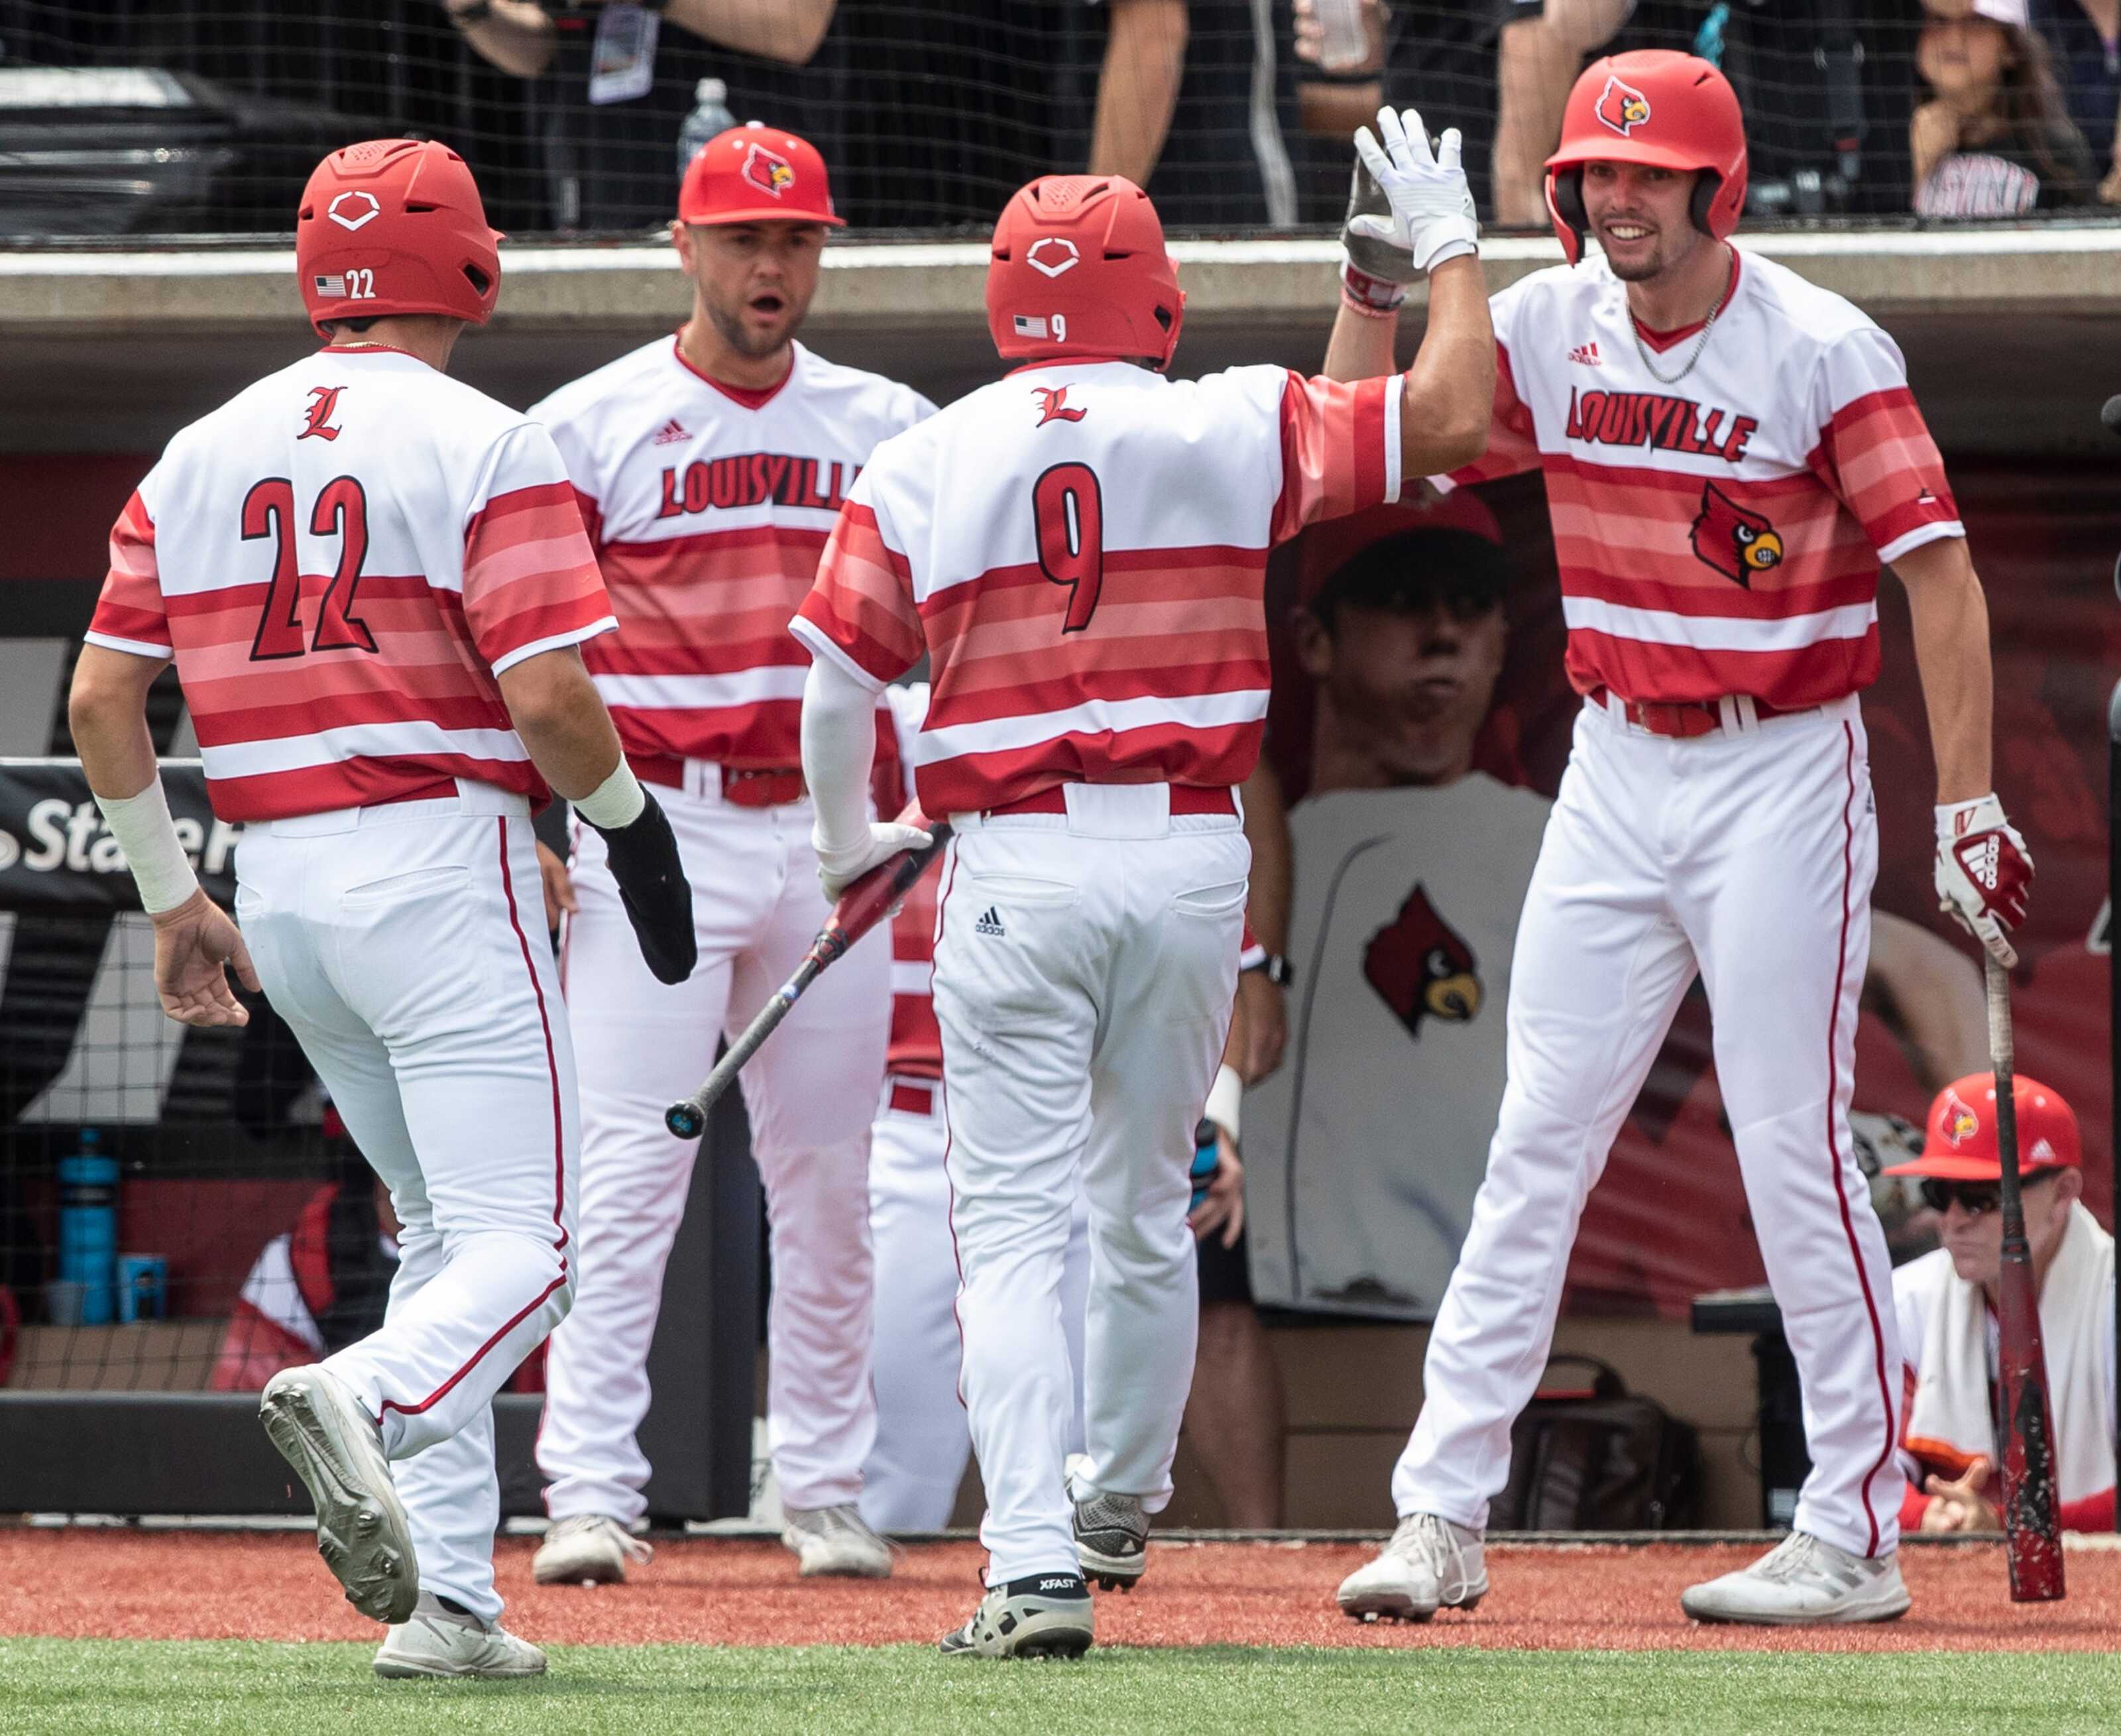 Louisville baseball out of NCAAs with loss to Texas Tech